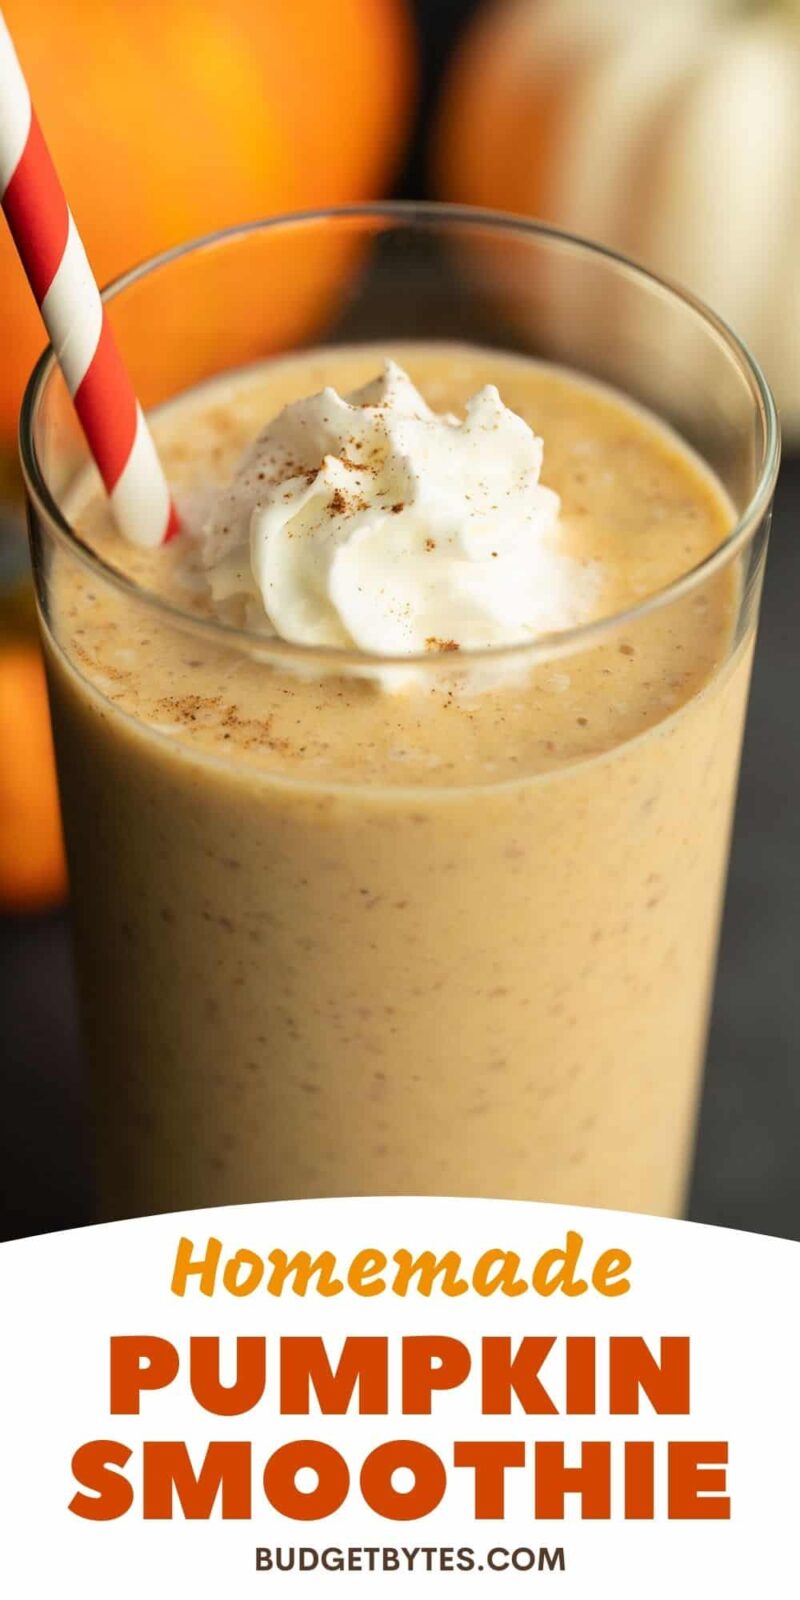 Close up of a pumpkin smoothie with whipped cream, title text at the bottom